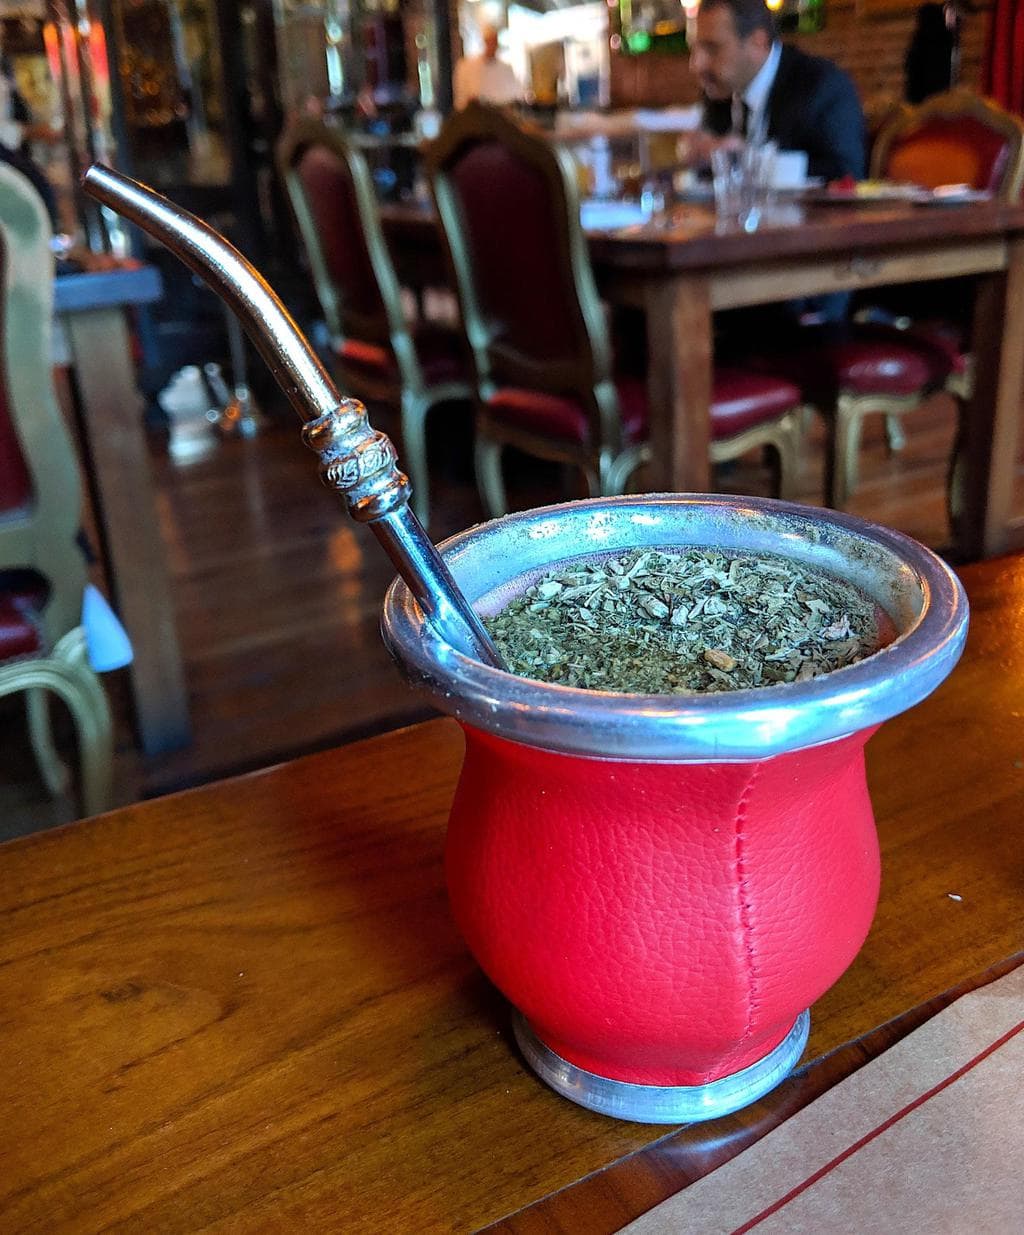 Mate herb, cup and straw